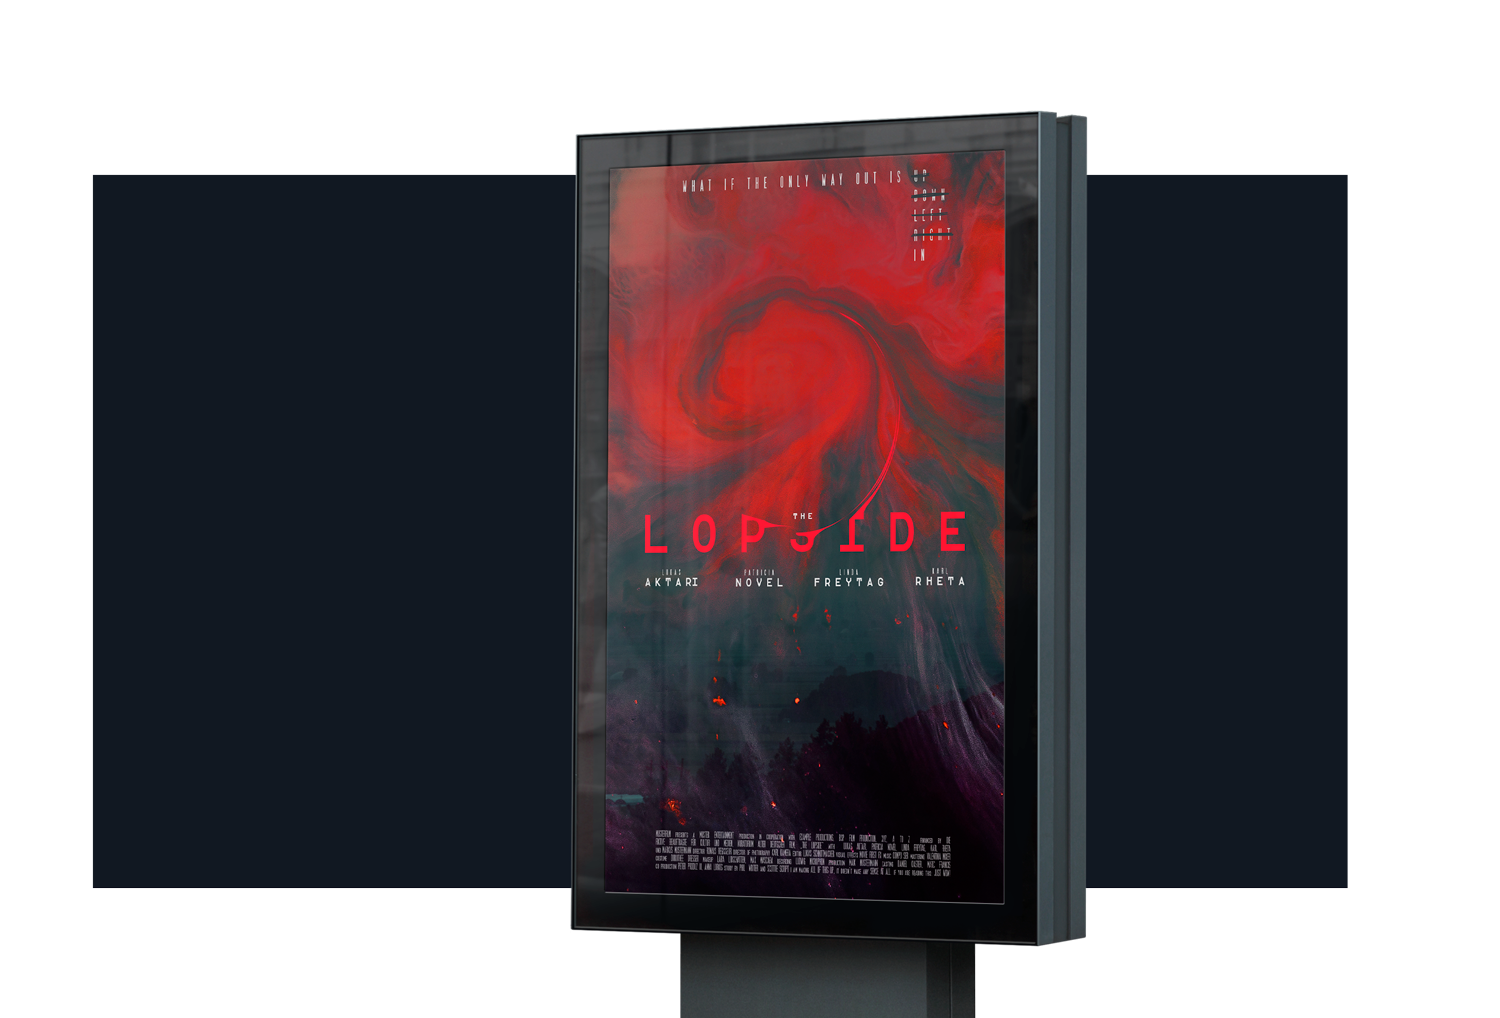 LOPSIDE Movie Poster designed by Tobias Heumann